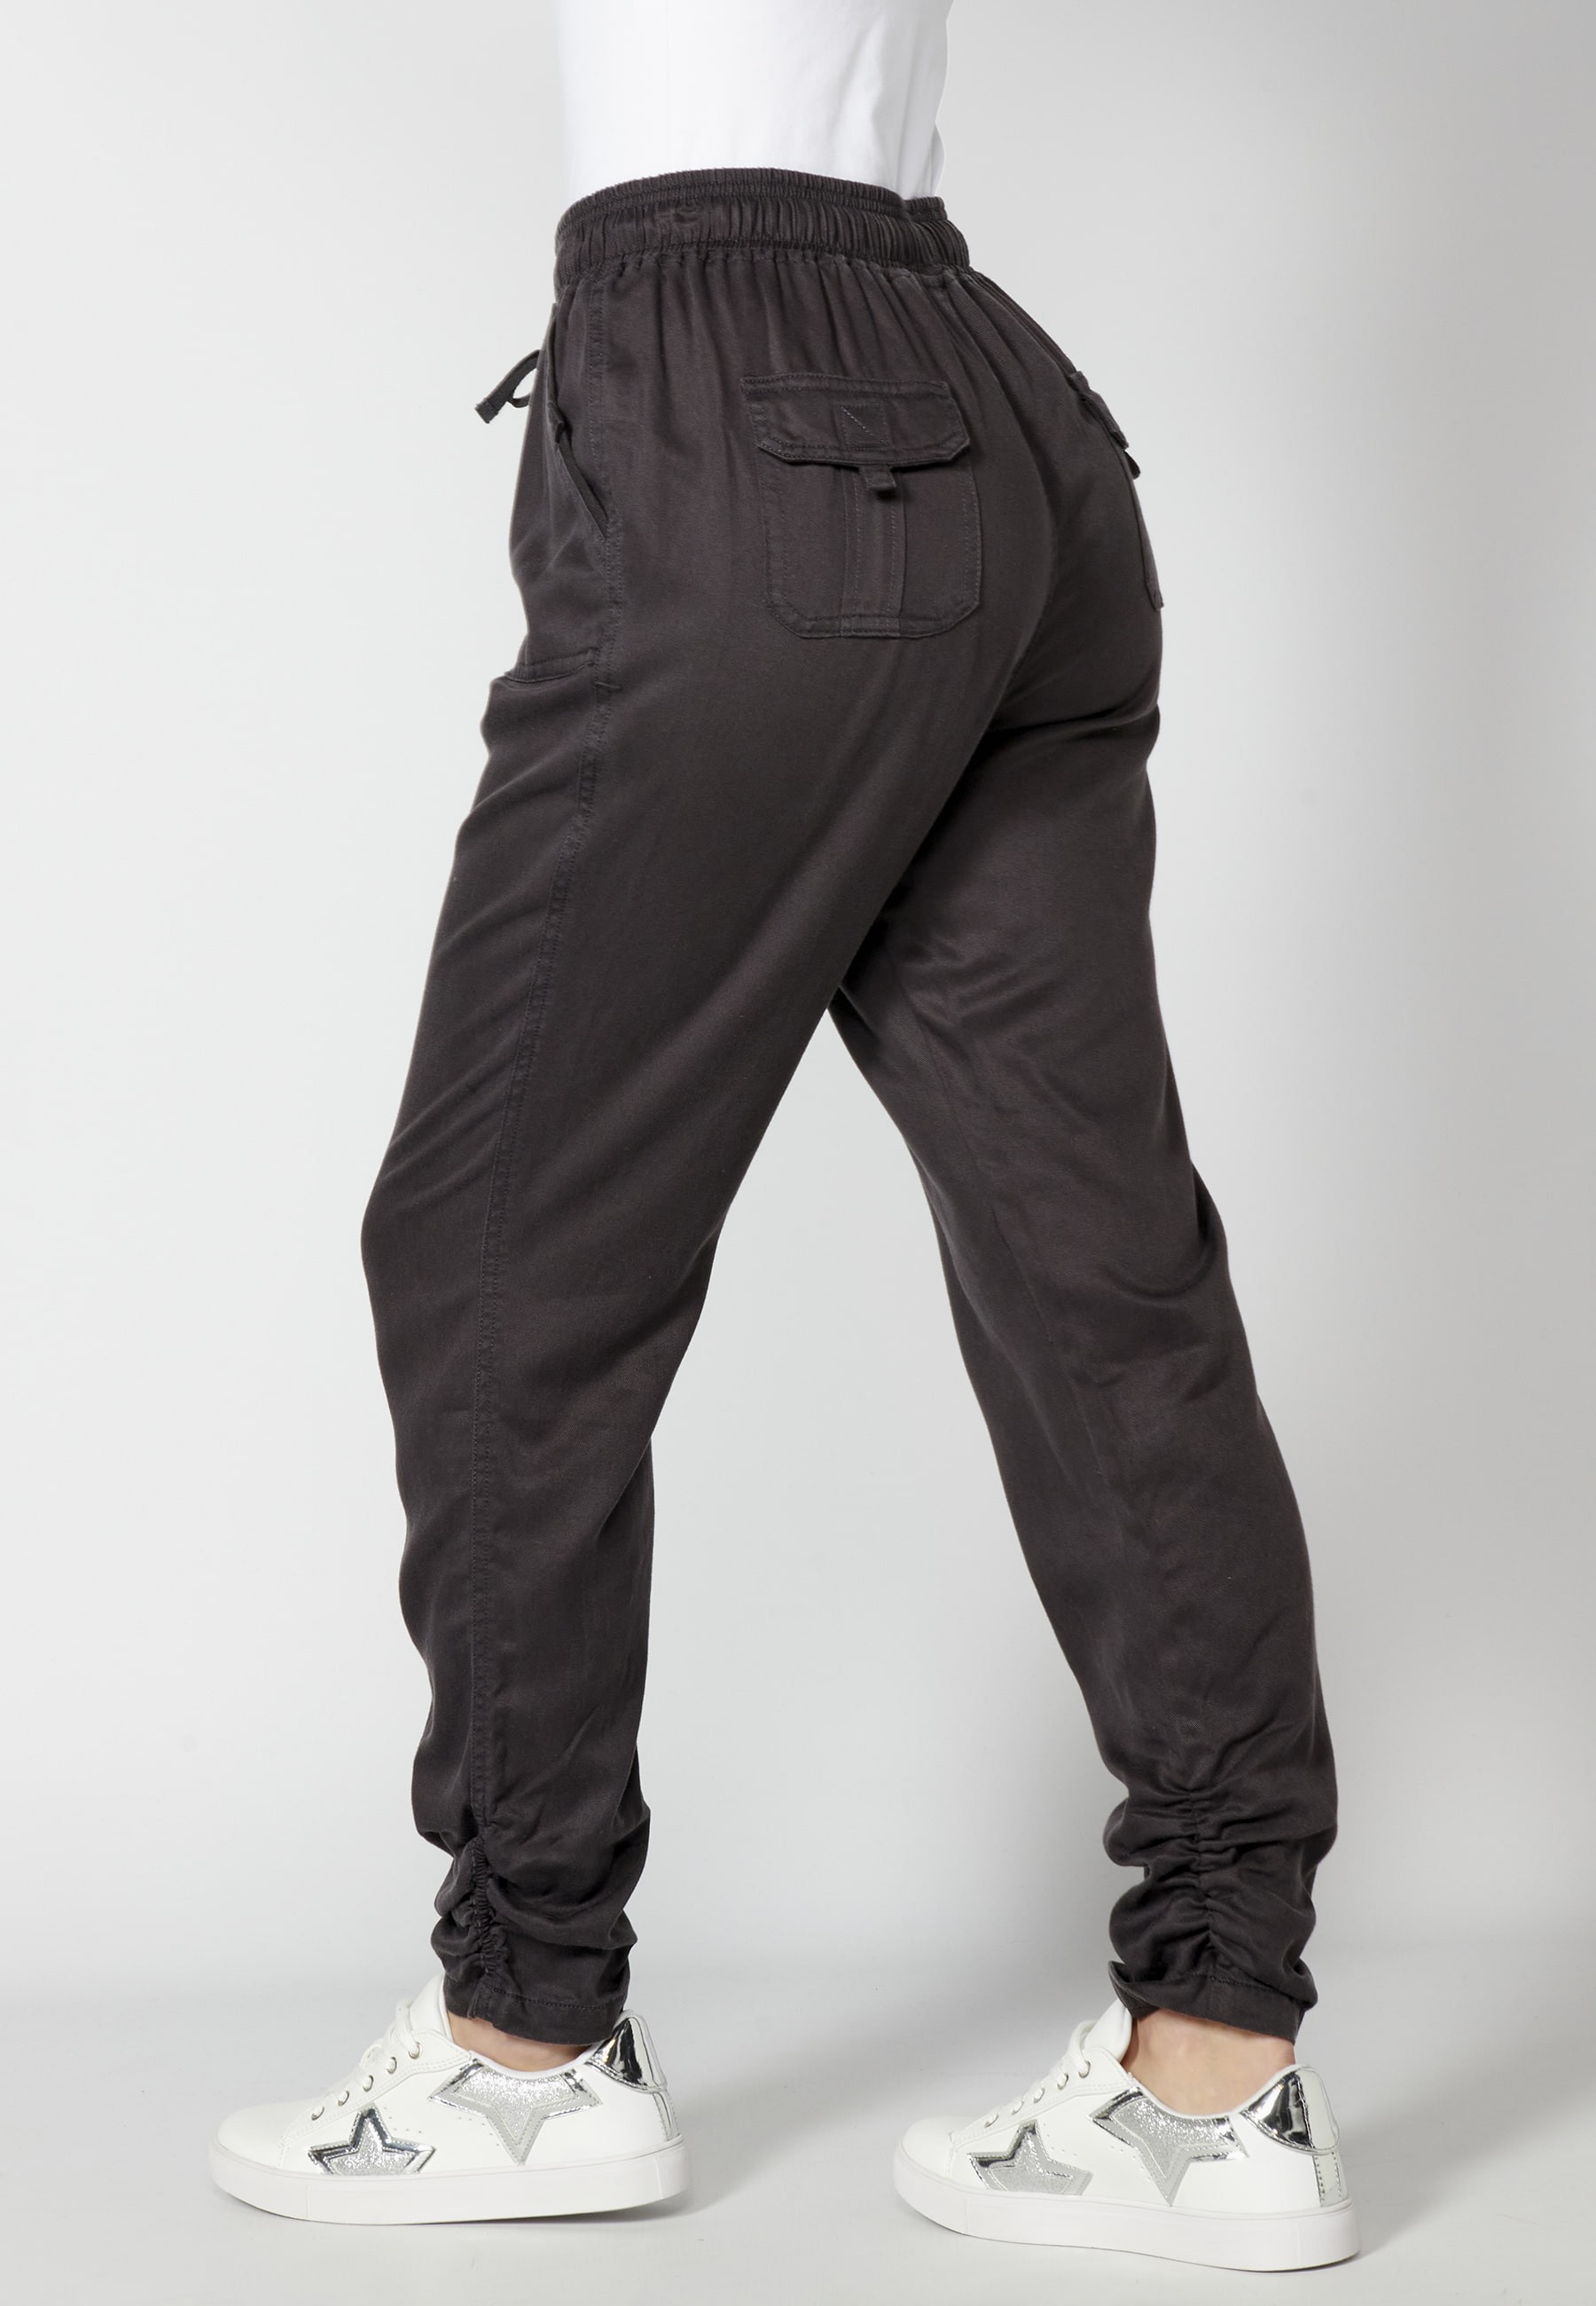 Long pants with adjustable waist Black color for Woman